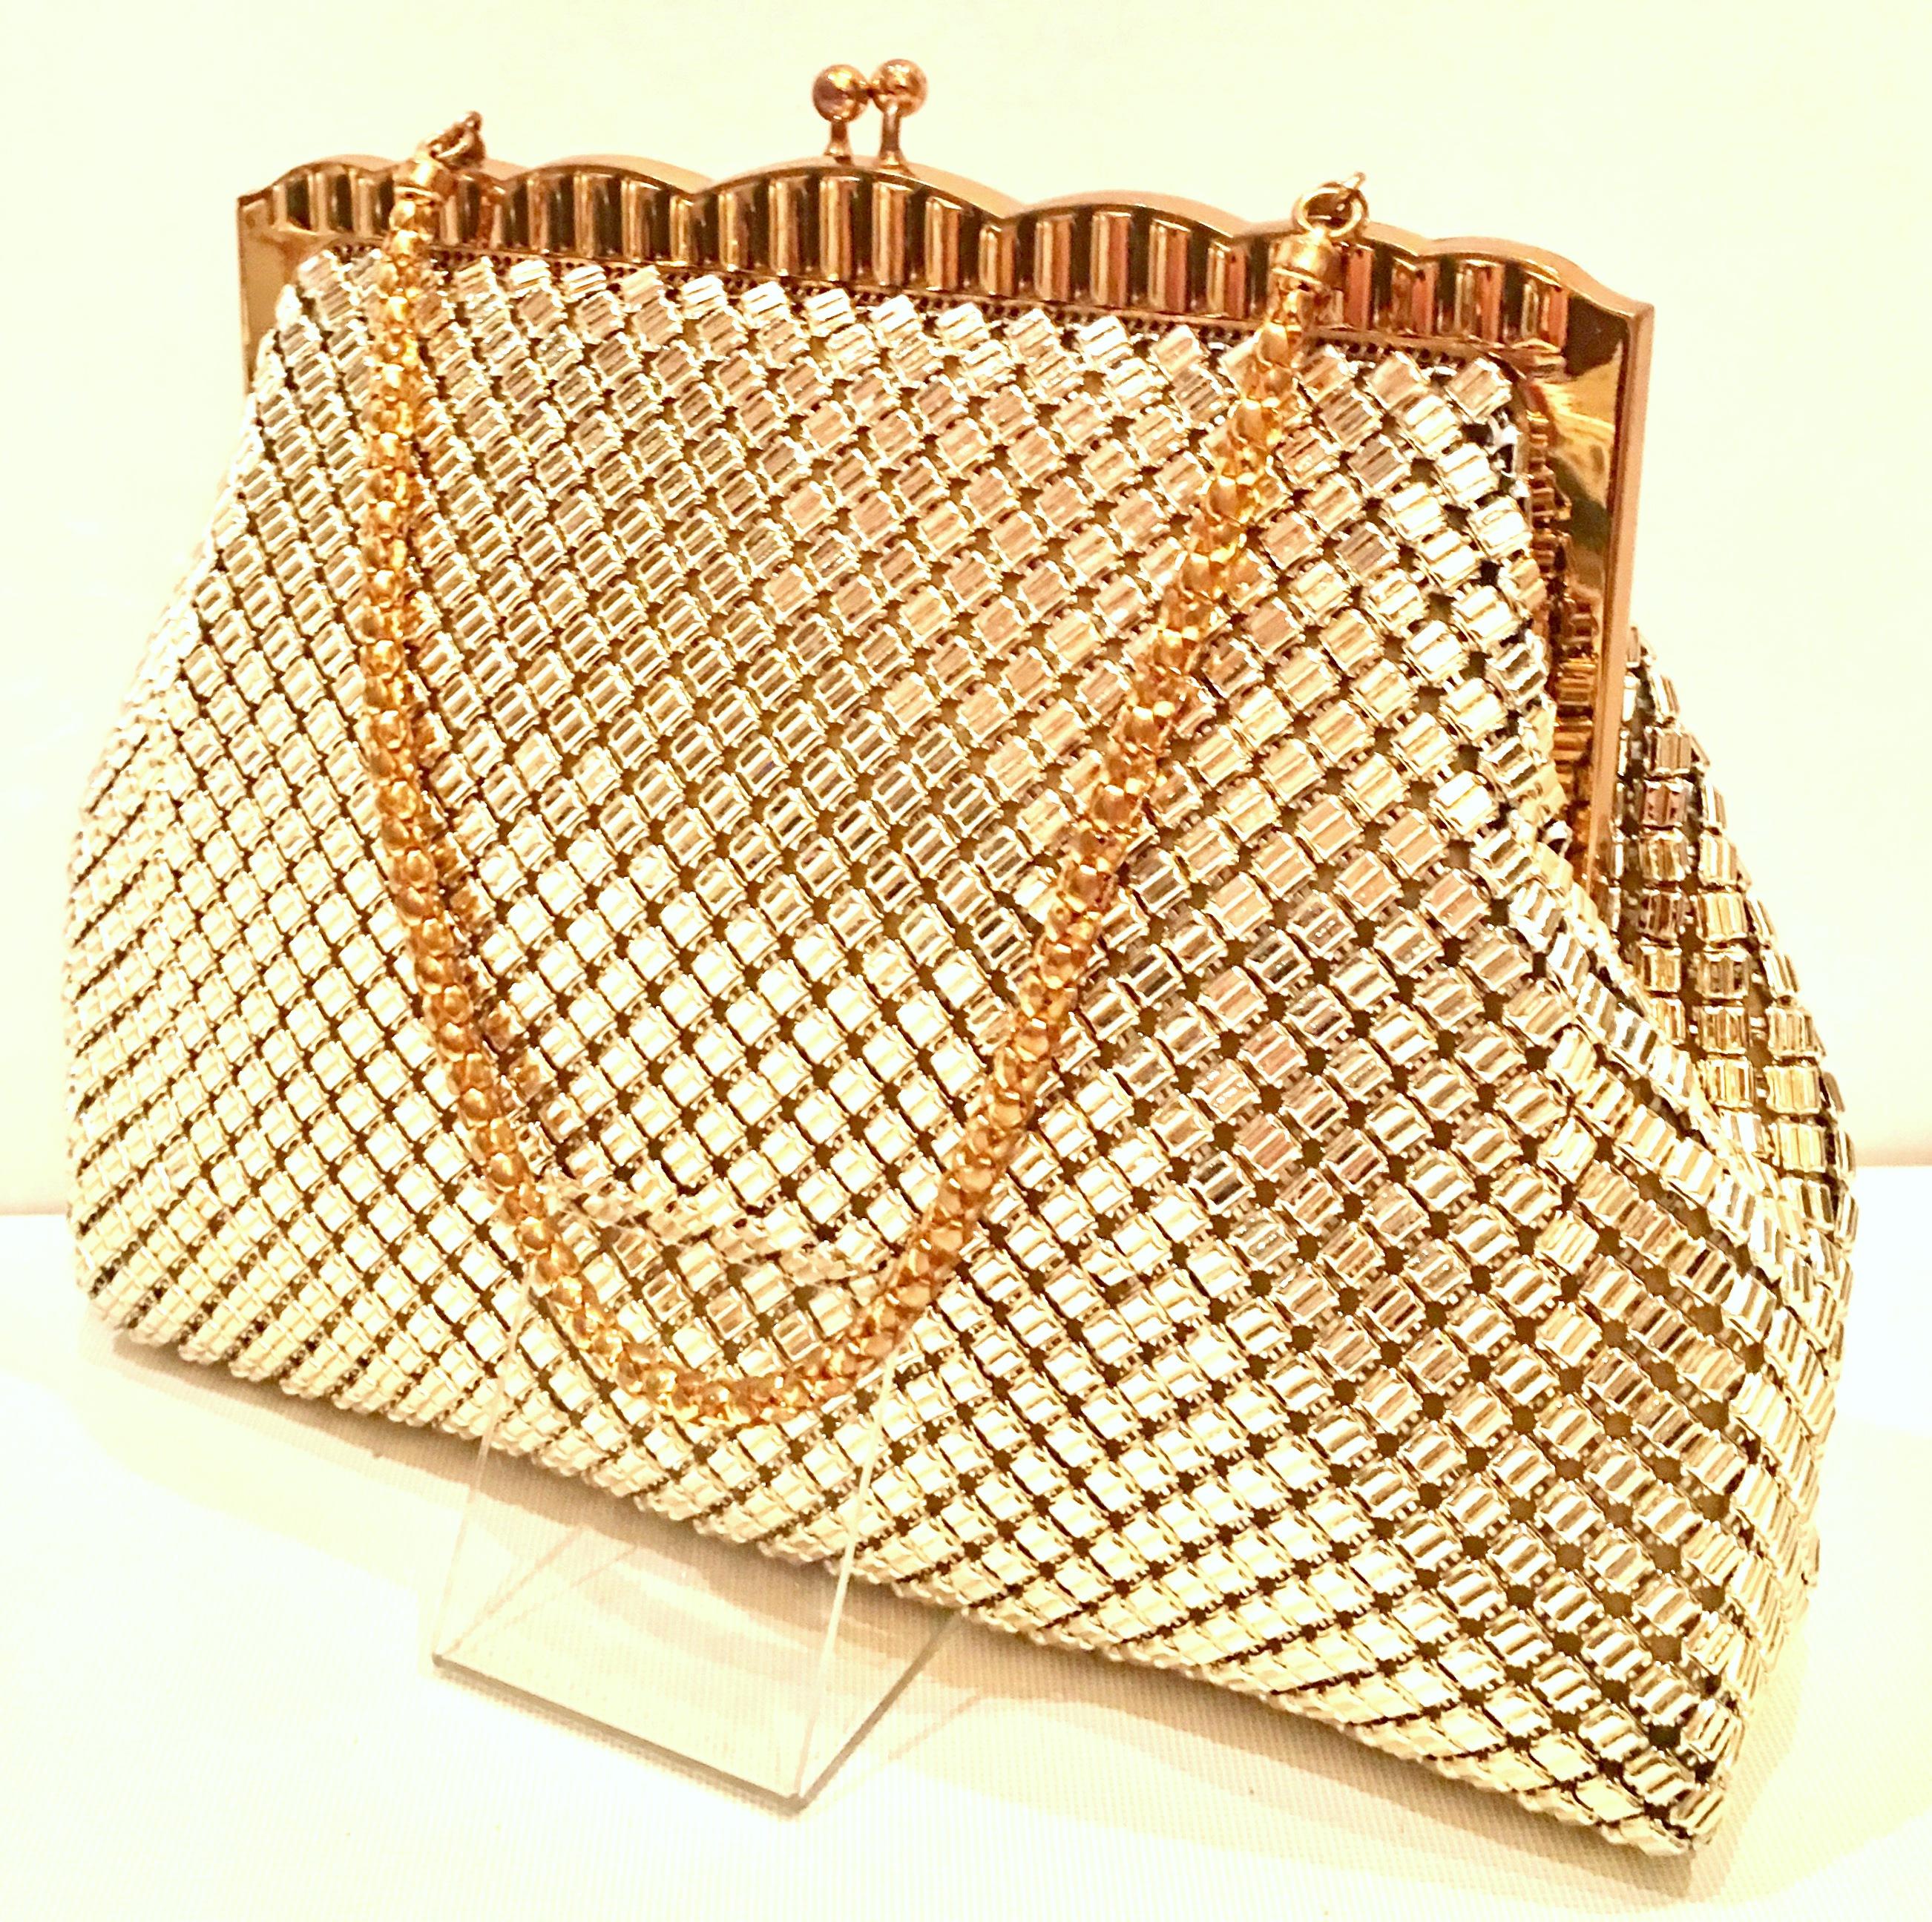 Mid-20th Century Whiting & Davis Gold Metal Mesh Handbag. This older, unique and pristine metal mesh handbag features a gilt gold metal frame with a soft metal mesh body and gilt gold rope style shoulder carrying strap. The interior pristine, has